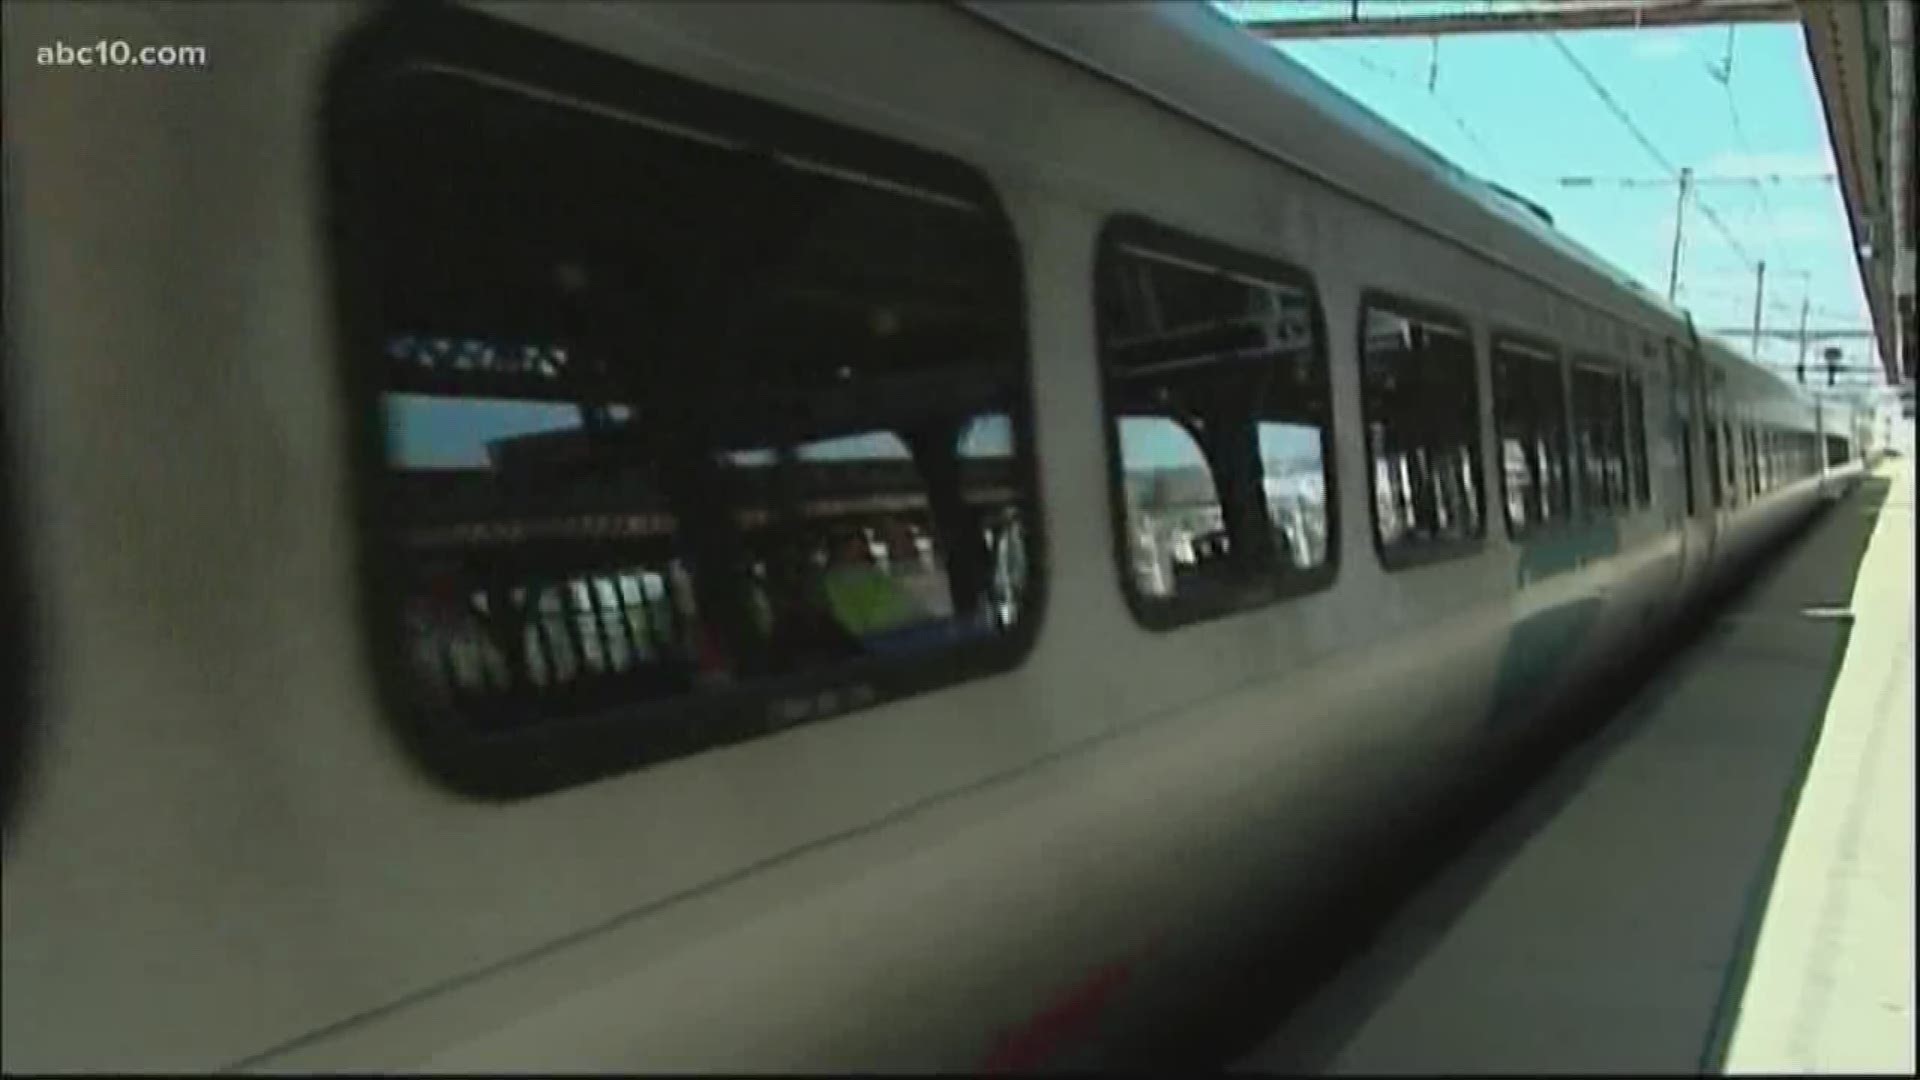 Transportation officials in Northern California are exploring what it would take to build a new rail connection between San Francisco, Sacramento and other Northern California communities.